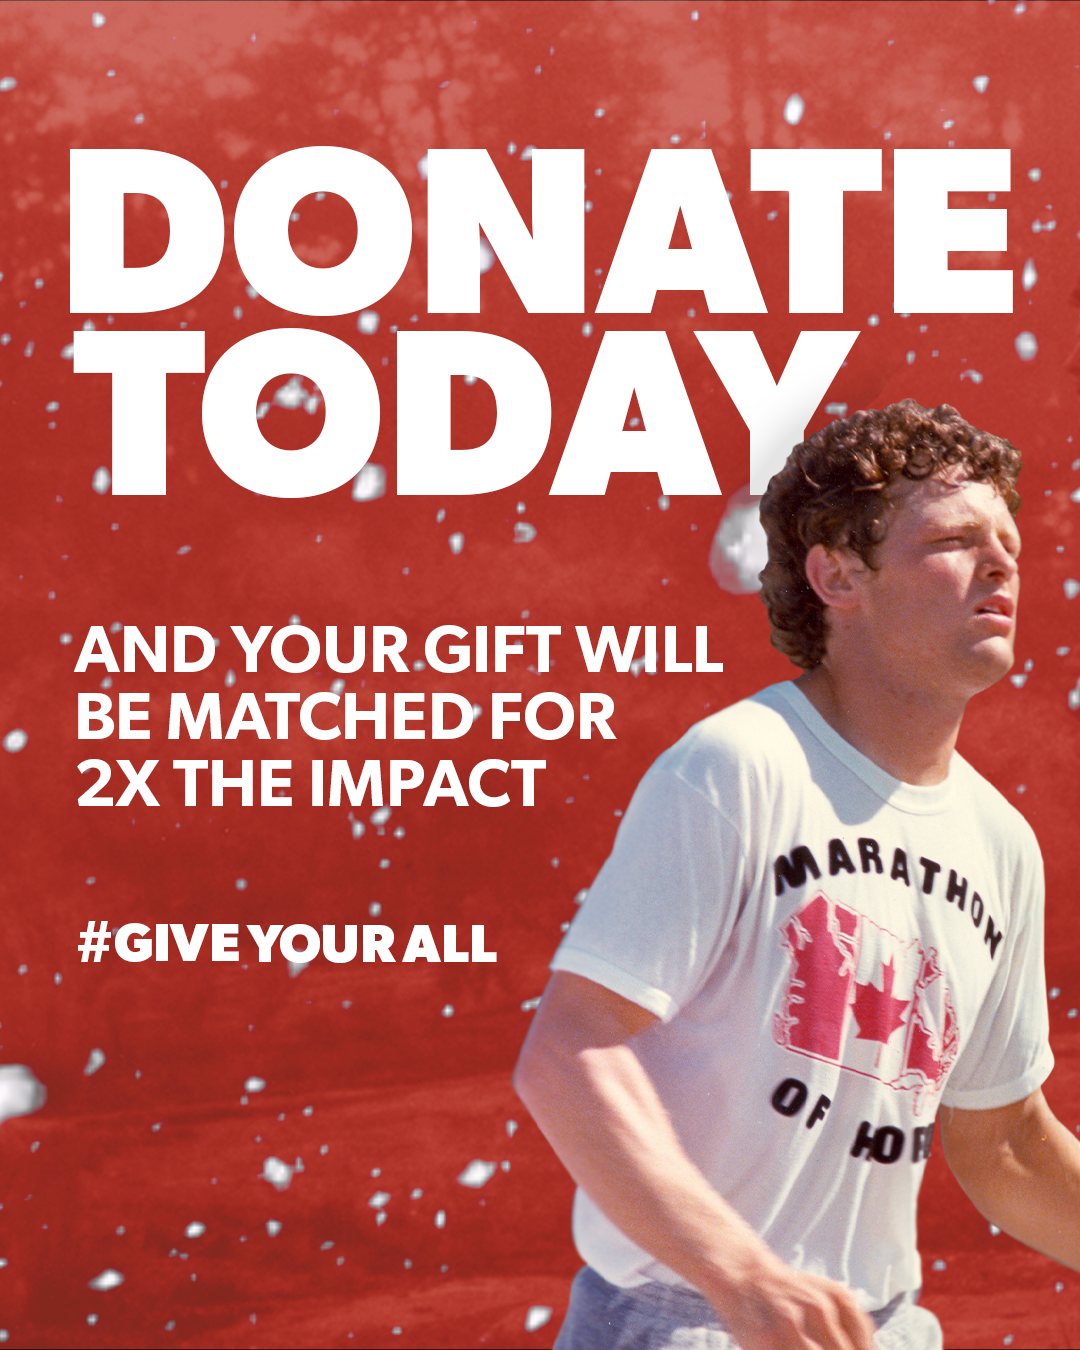 Image of Terry Fox with the text, "Donate Today and your gift will be matched for 2X the impact. #GiveYourAll"